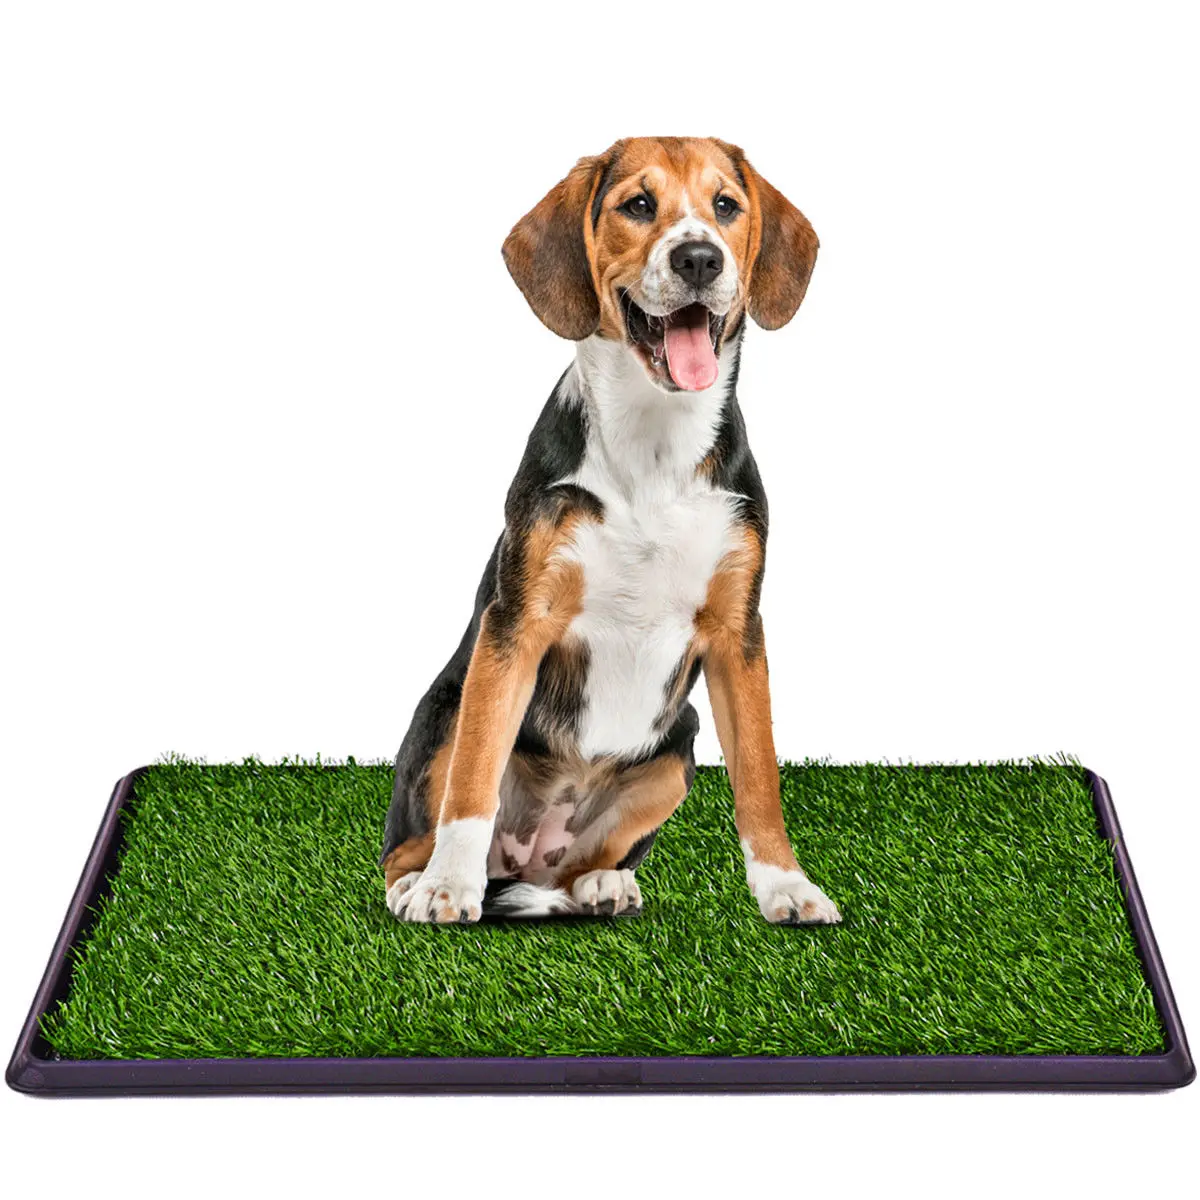 

Artificial Grass Bathroom Mat for Puppies and Small Pets- Portable Potty Trainer Pet Potty Training Pee Dog Puppy Indoor Toilet